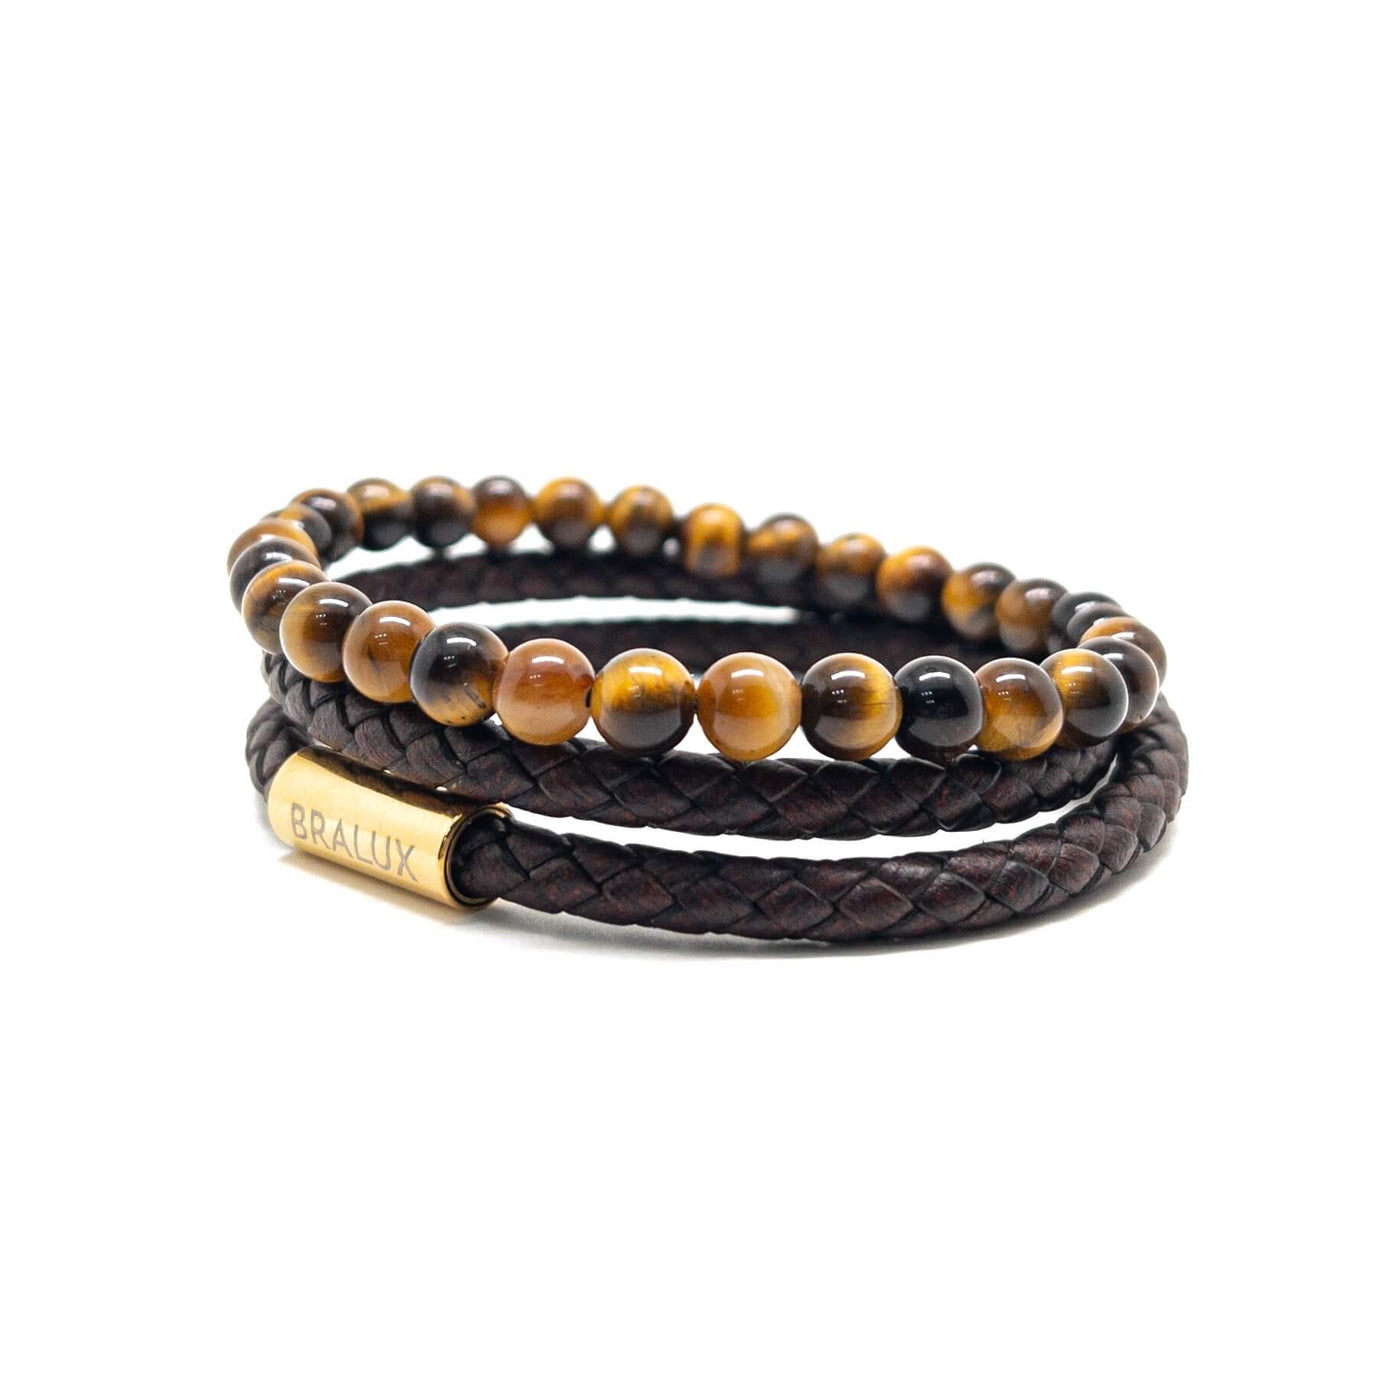 The Dark Brown Leather and Tiger eye Stack